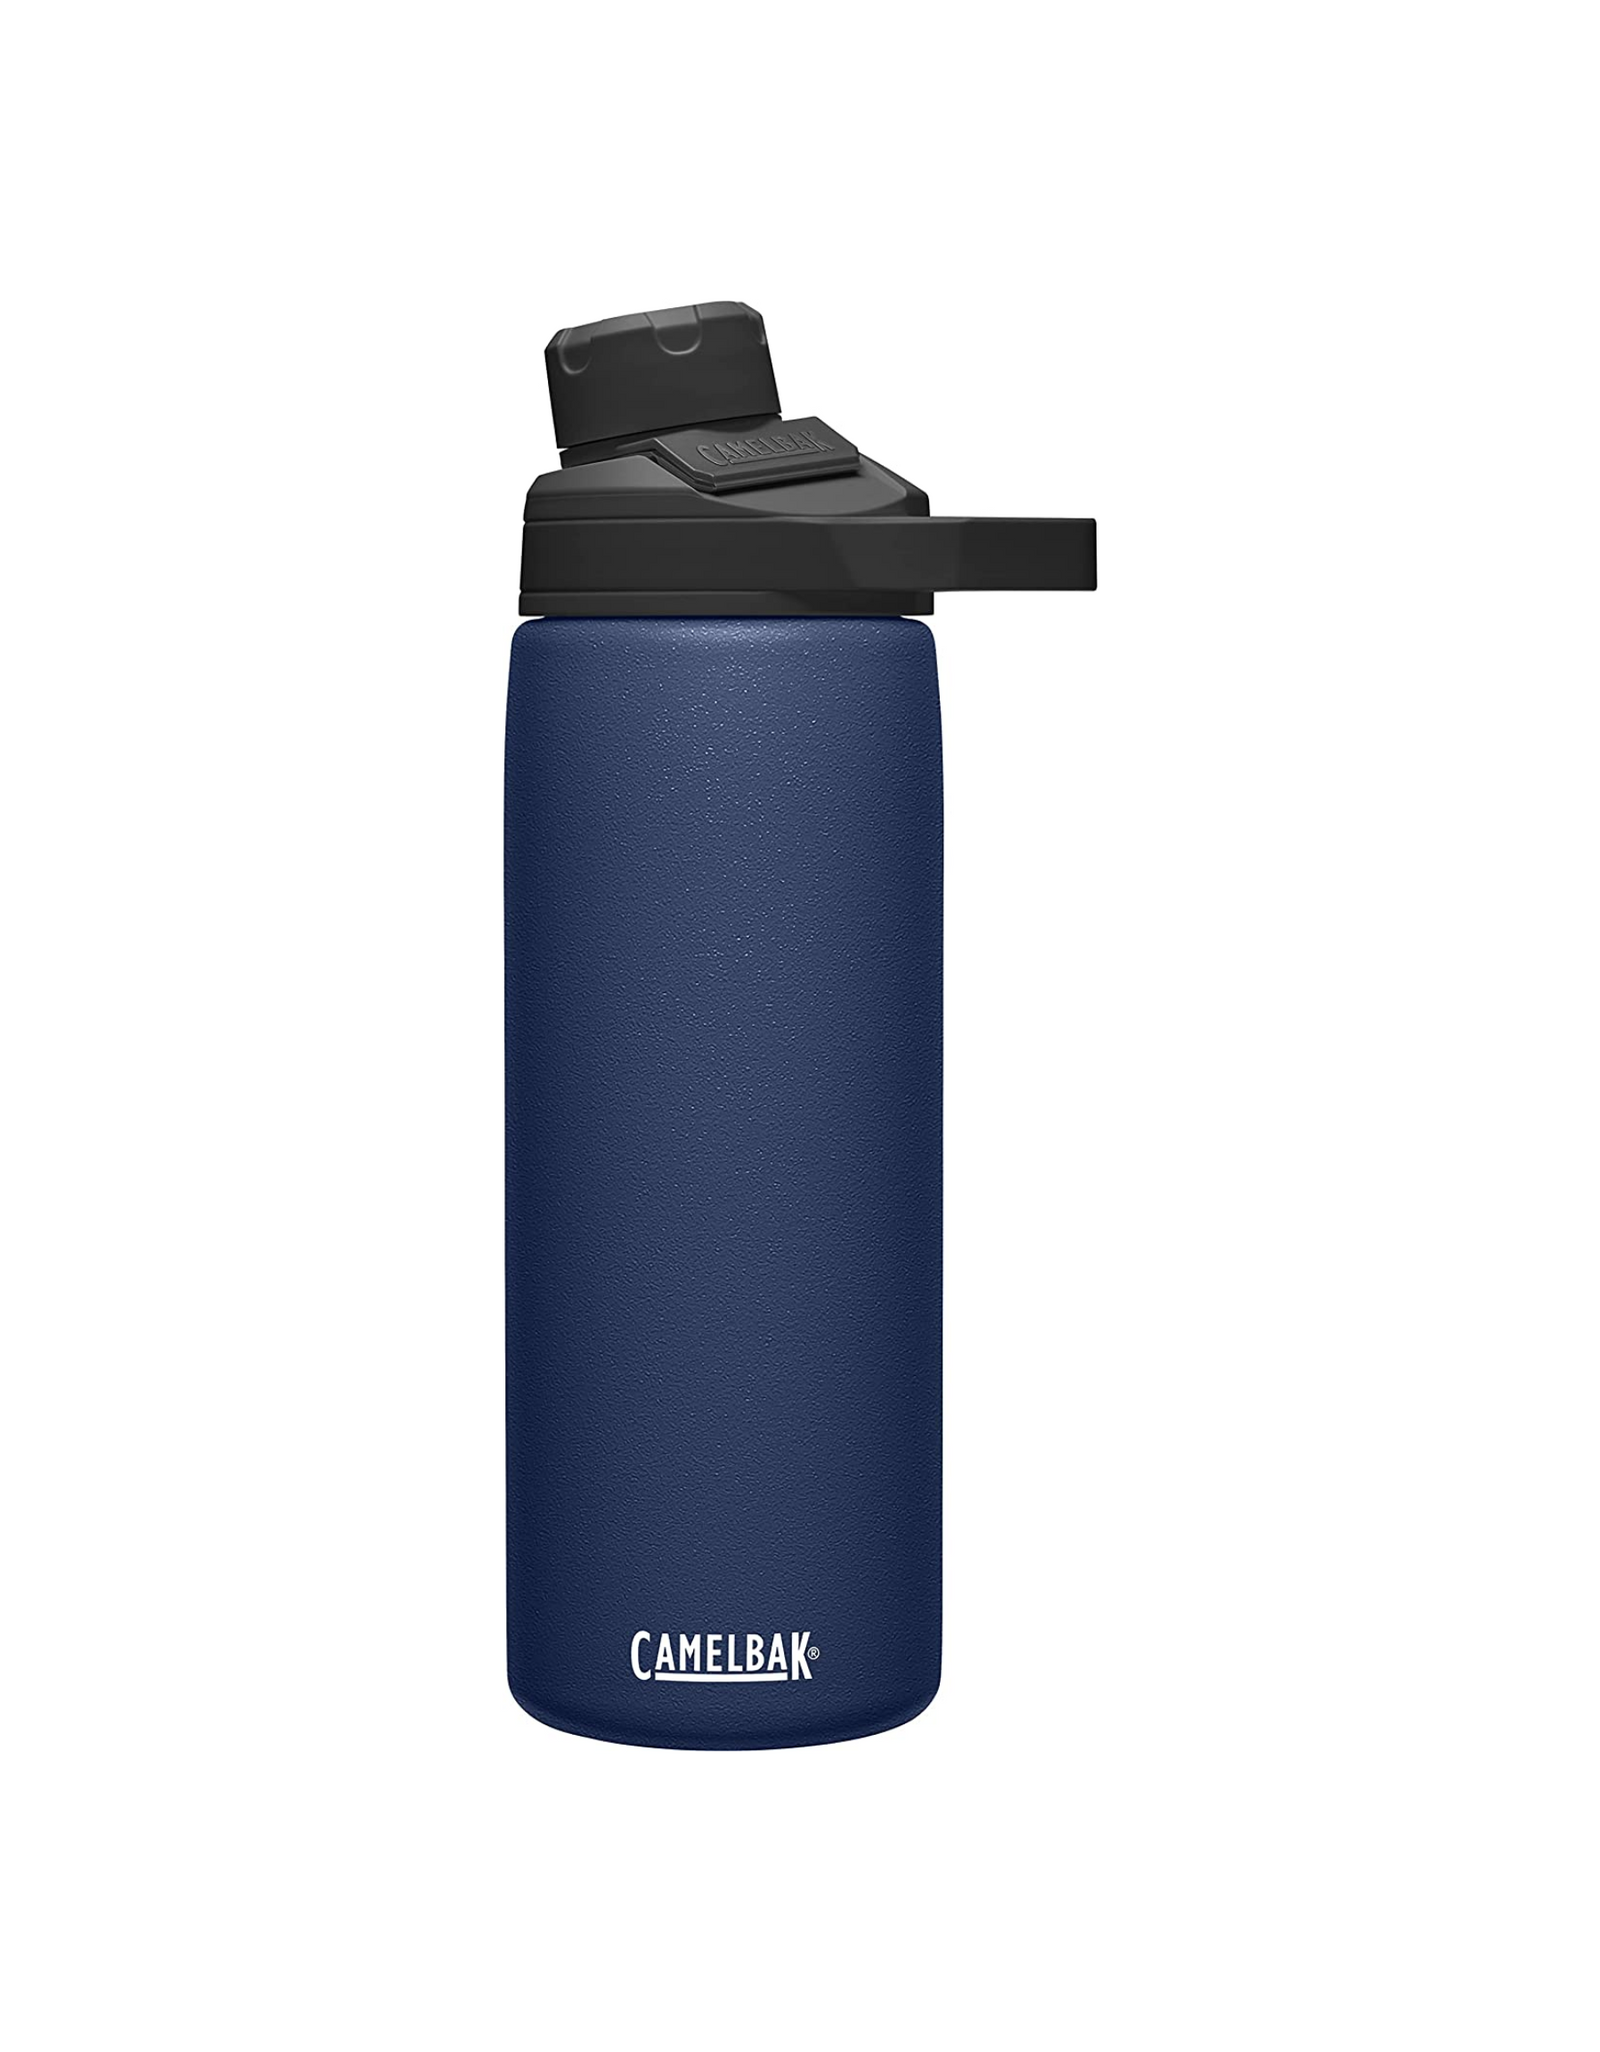 CamelBak Chute Mag Water Bottle, Insulated Stainless Steel, 20 oz, Navy